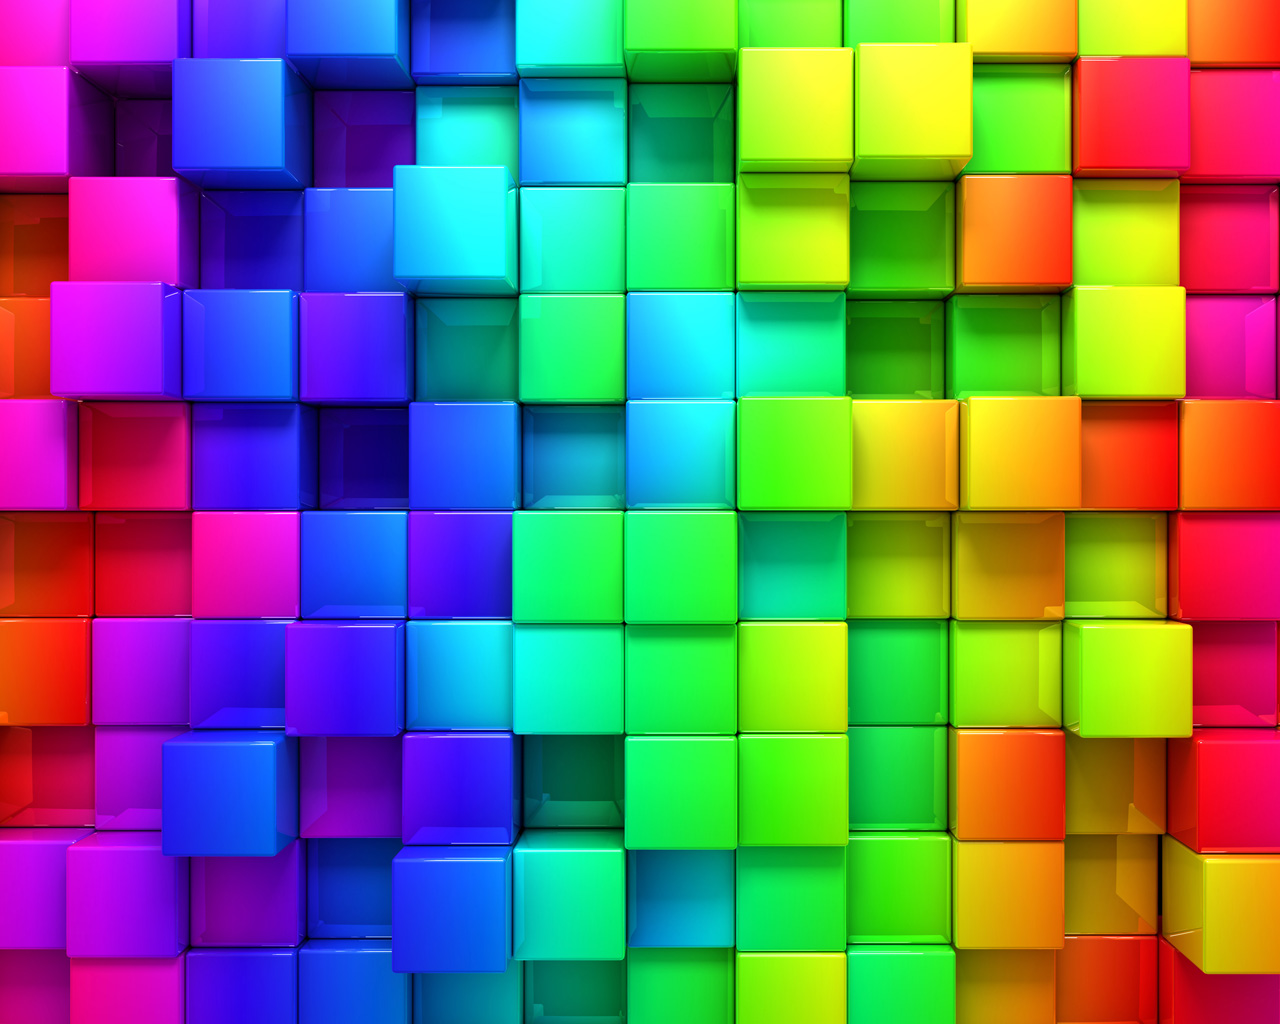 3d Colorful Cubes Backgrounds For PowerPoint #643